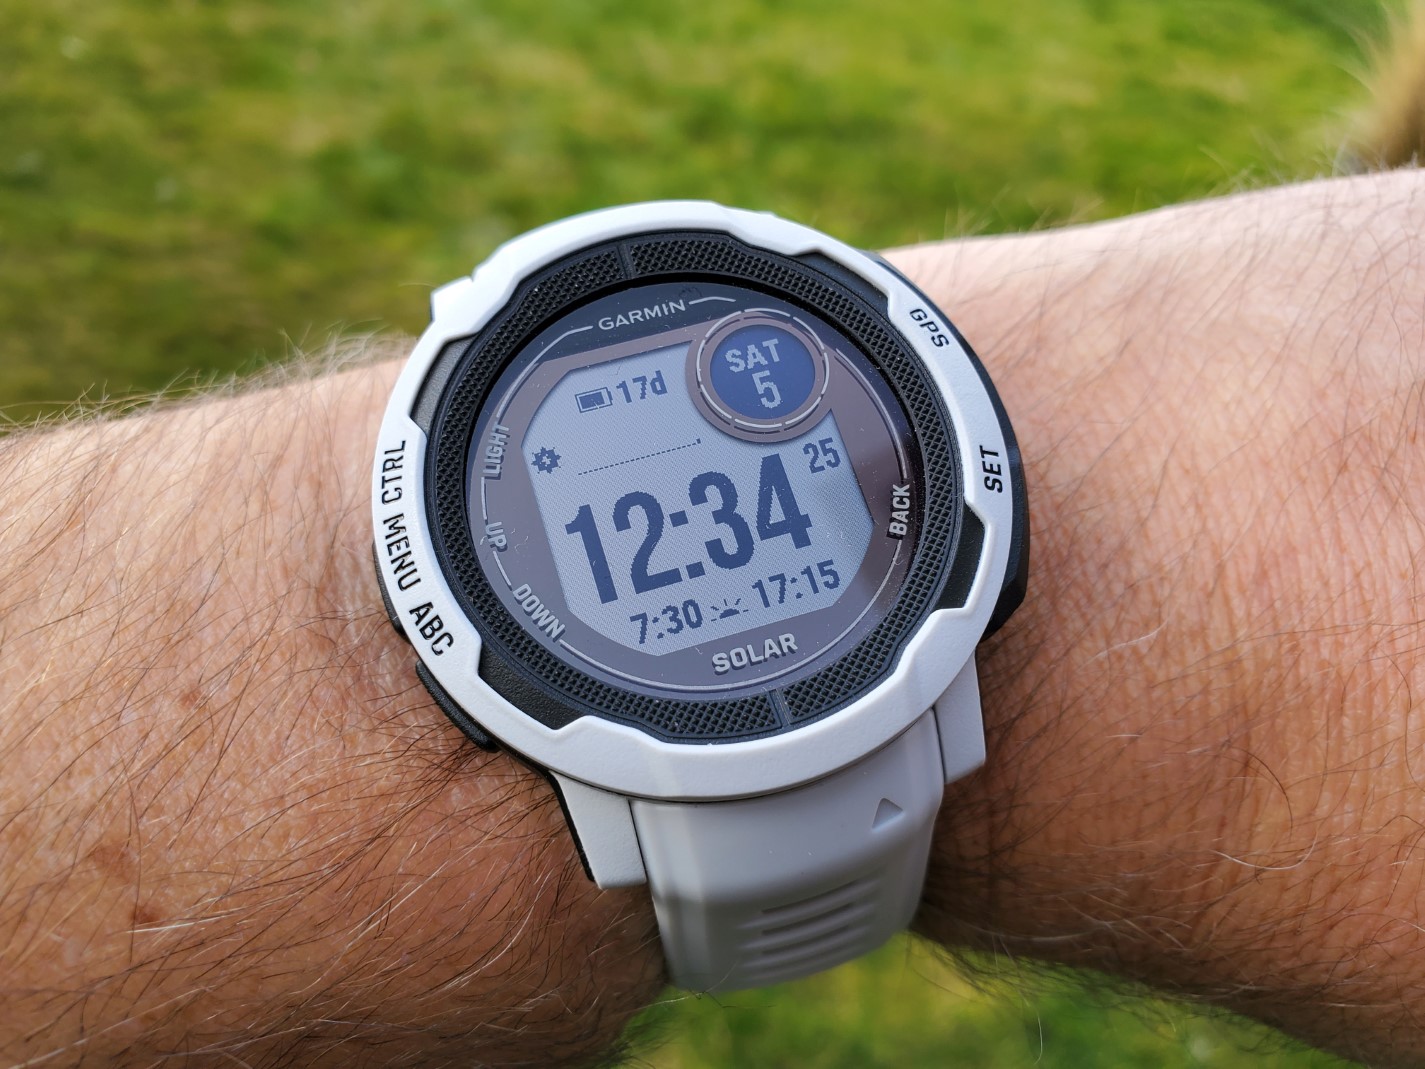 Garmin 2 Solar review: colorful, long lasting, and fit for all | ZDNET